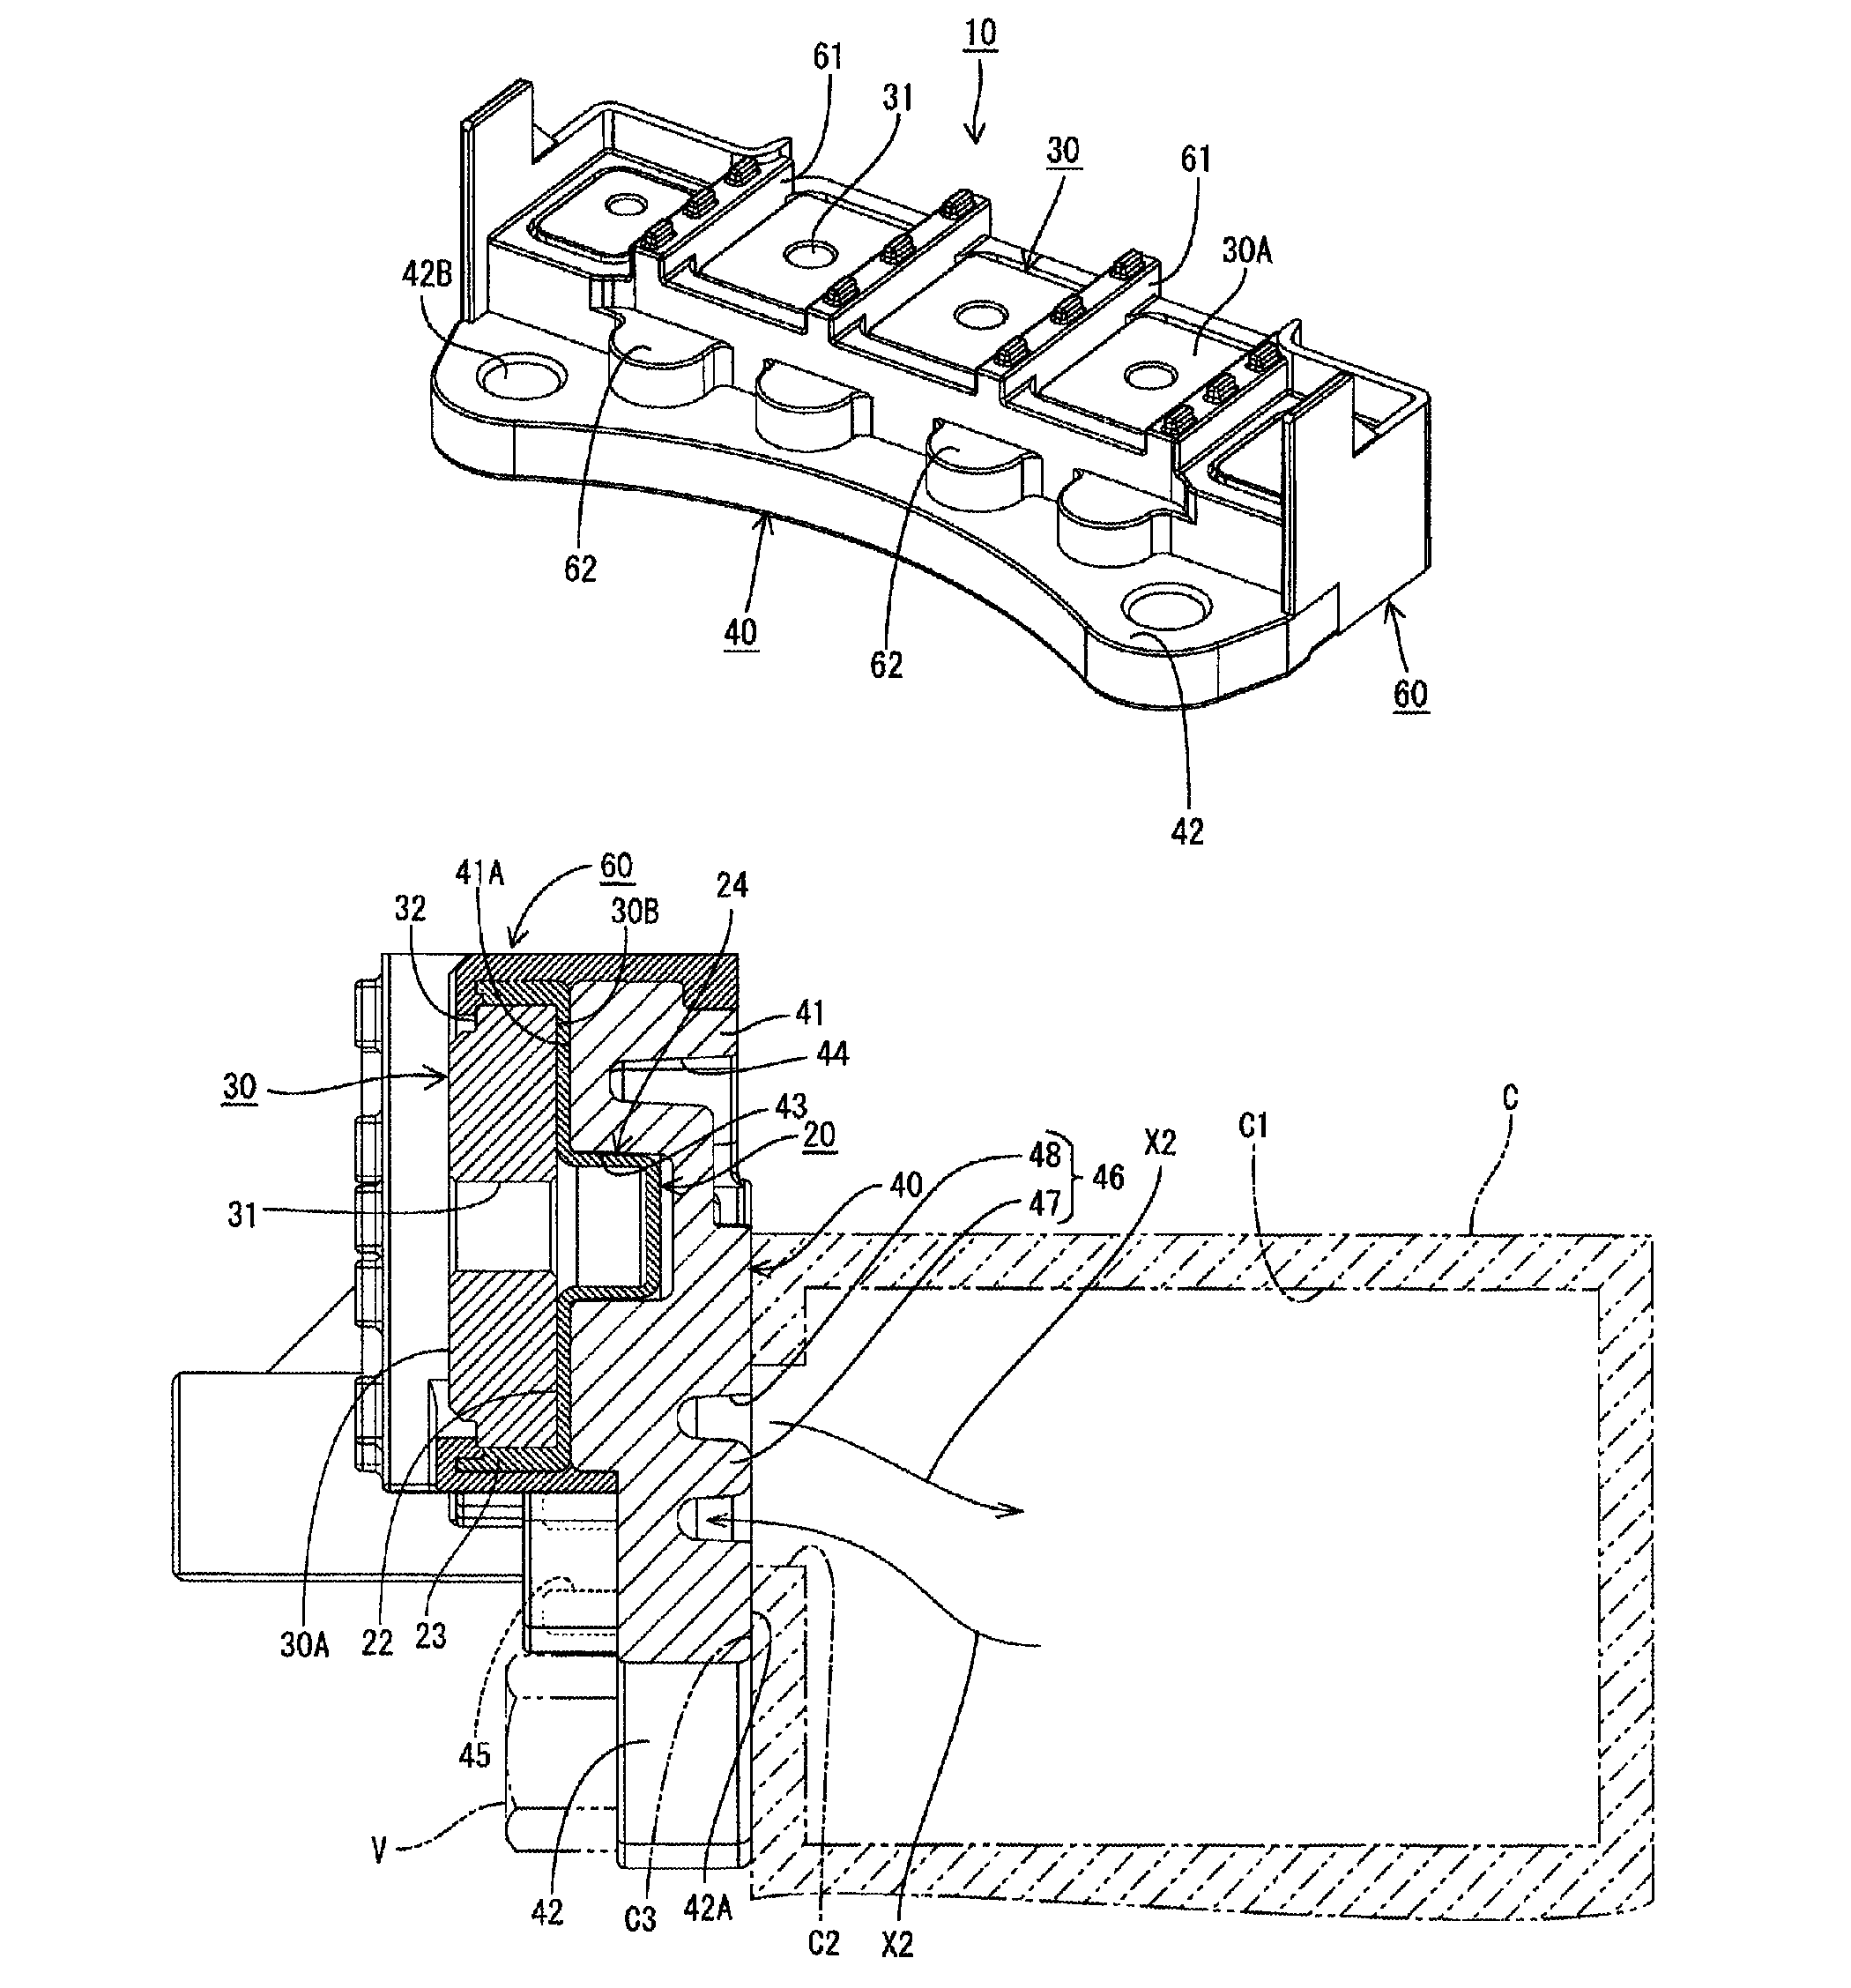 Terminal block with integral heat sink and motor provided therewith